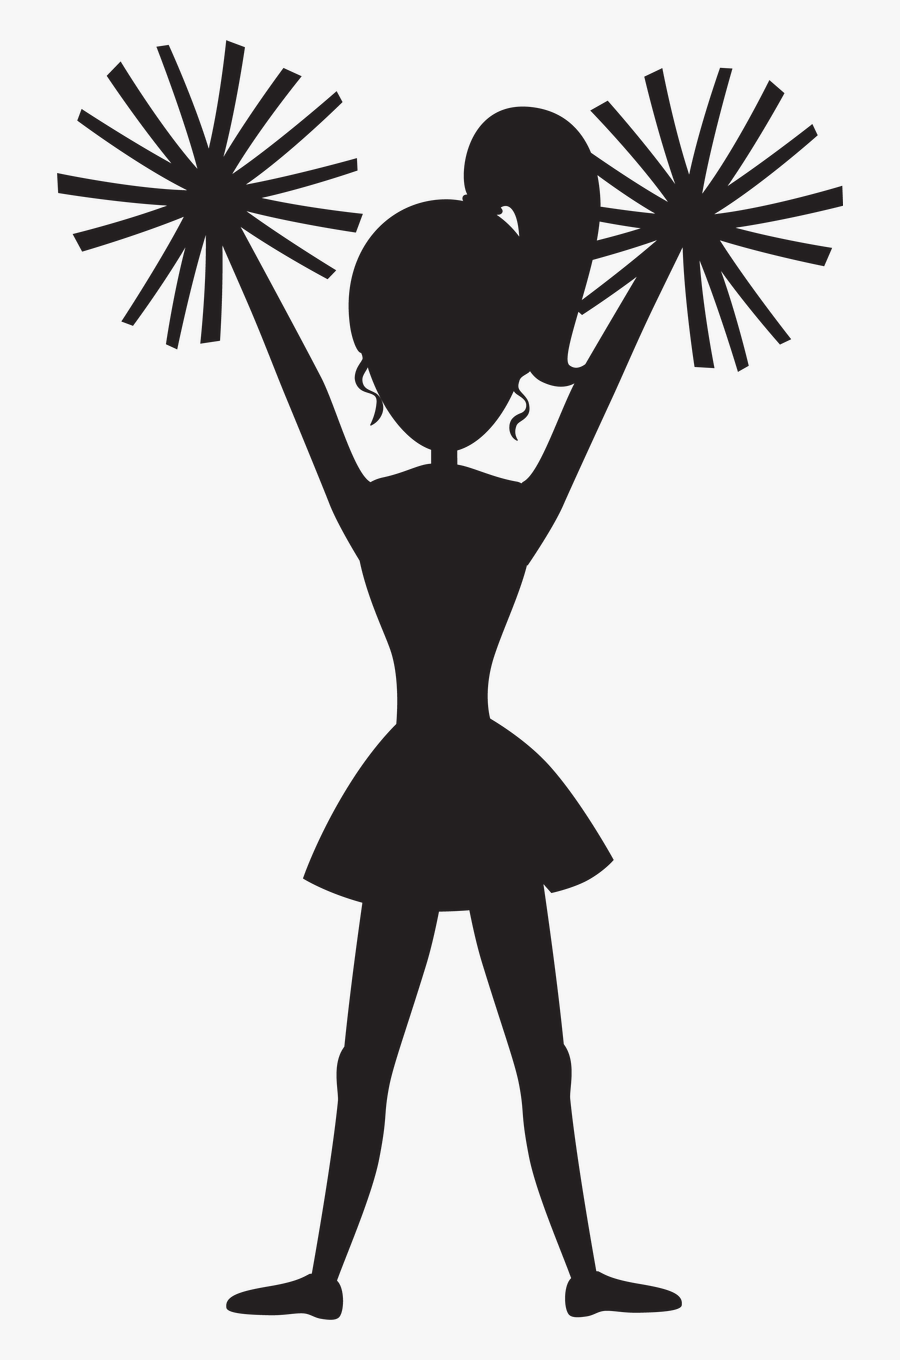 Silhouette Cheerleading Image Clip Art Illustration - Cheer Silhouette Svg, Transparent Clipart